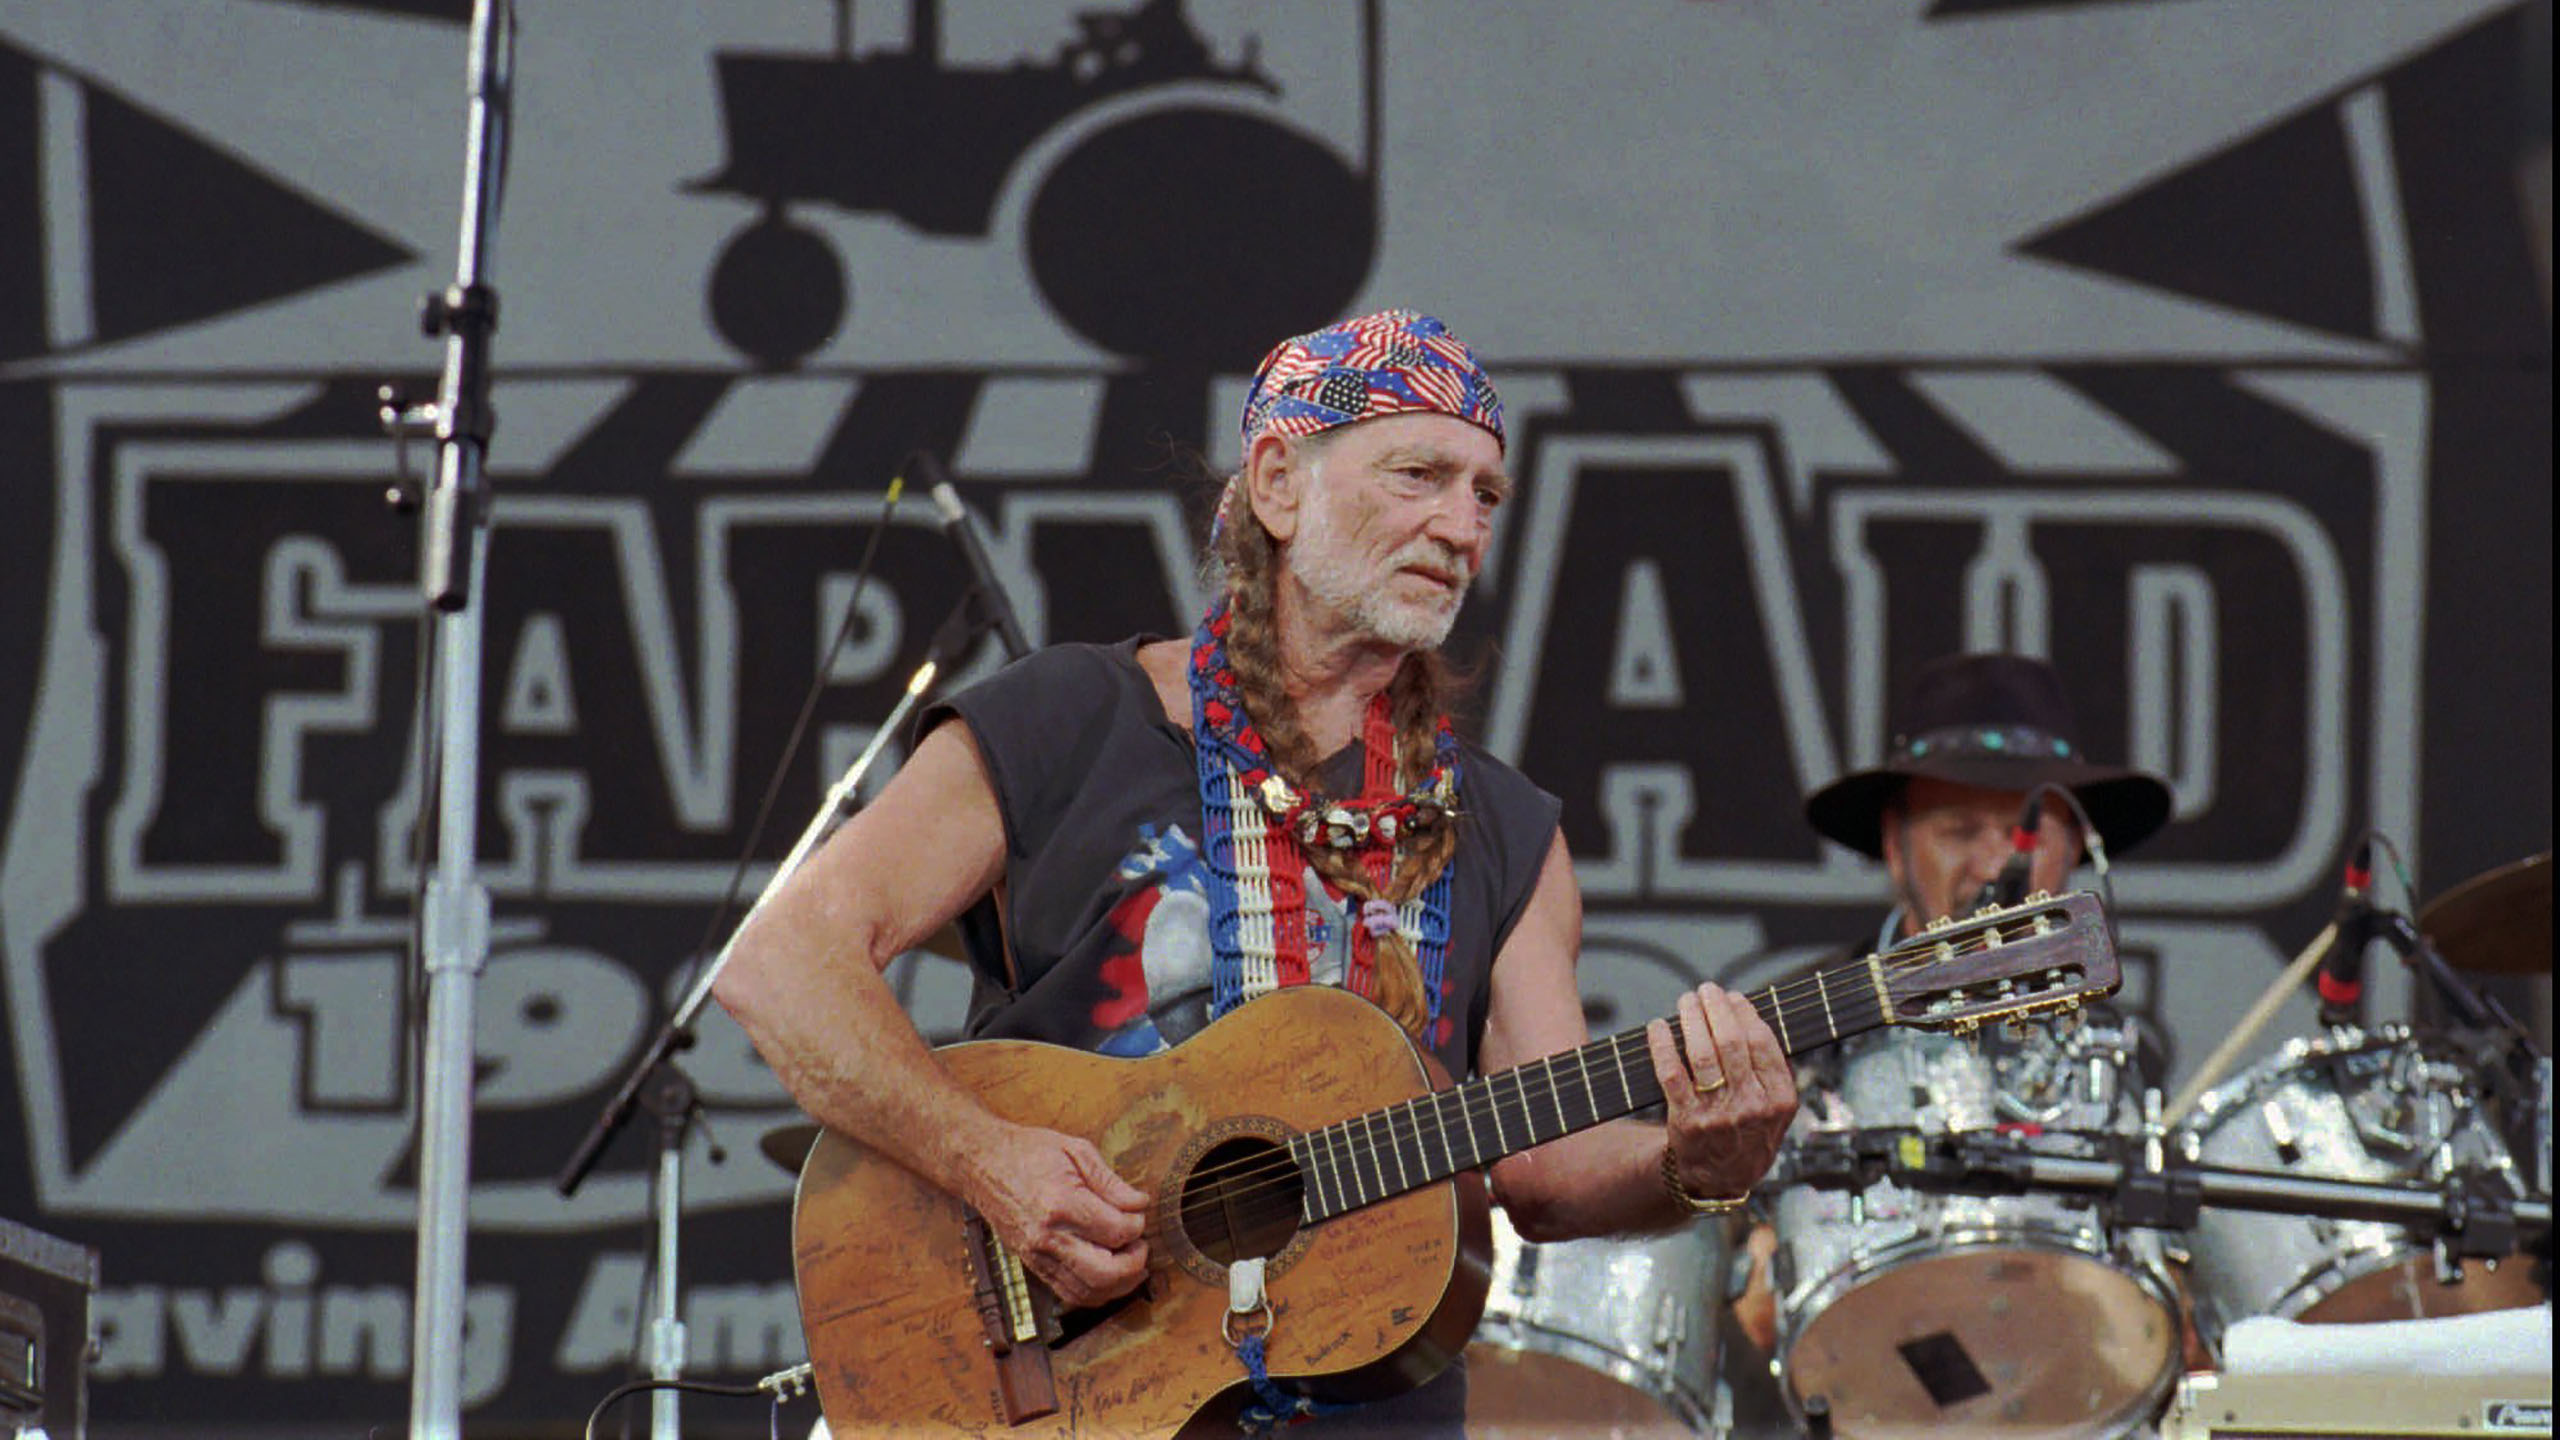 Willie Nelson is pictured at Farm Aid